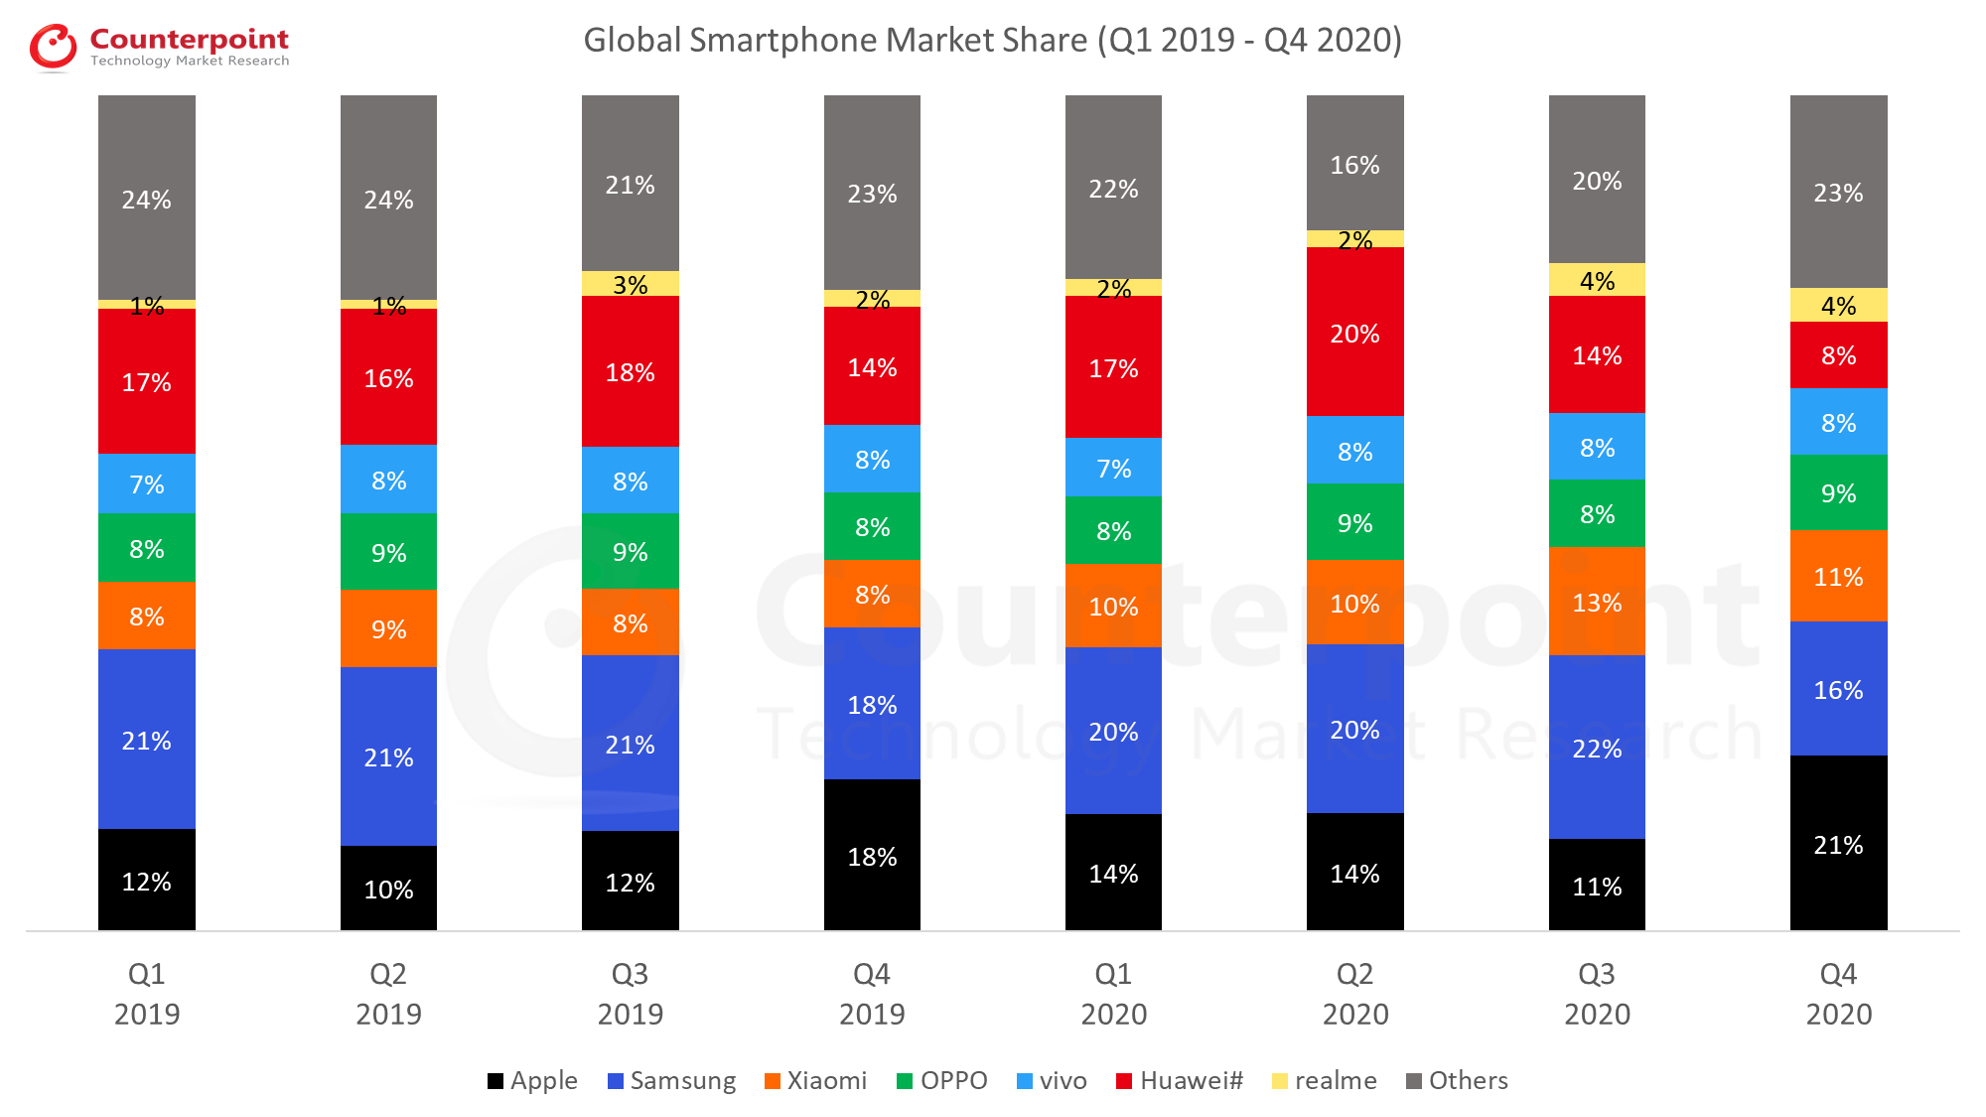 Counterpoint Research - Q4 2020 - Global Smartphone Market